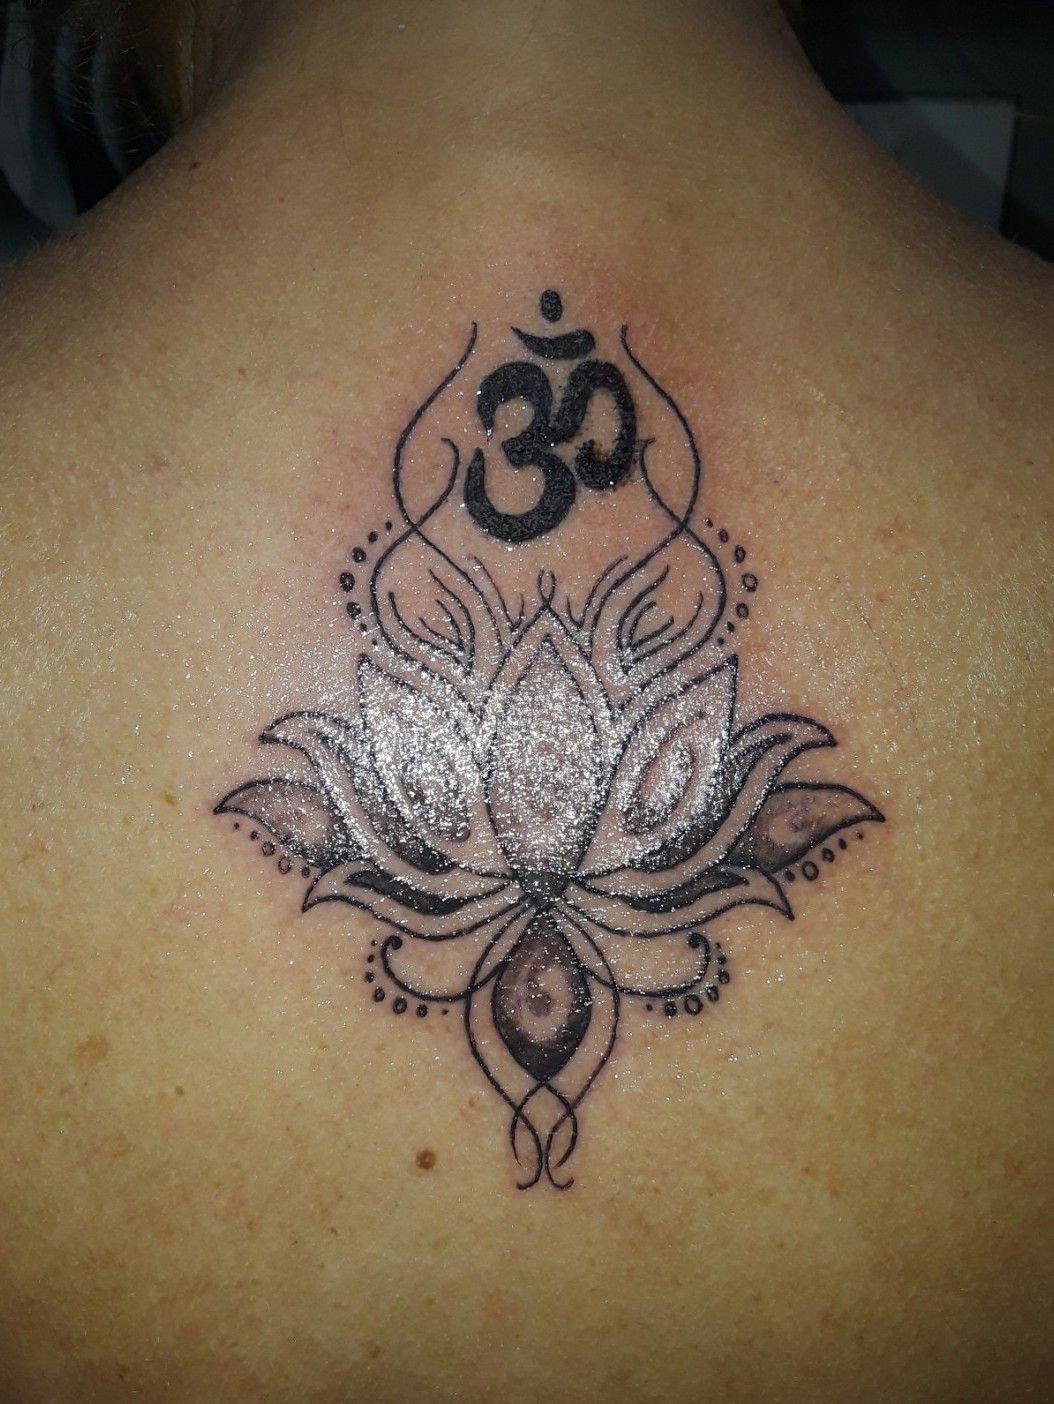 Tattoo uploaded by Michele Wilson • Chakra symbol Third eye chakra with  lotus flower. Still needs the purple added and doing that asap! The  placement is approx on the 3rd vertebrae of